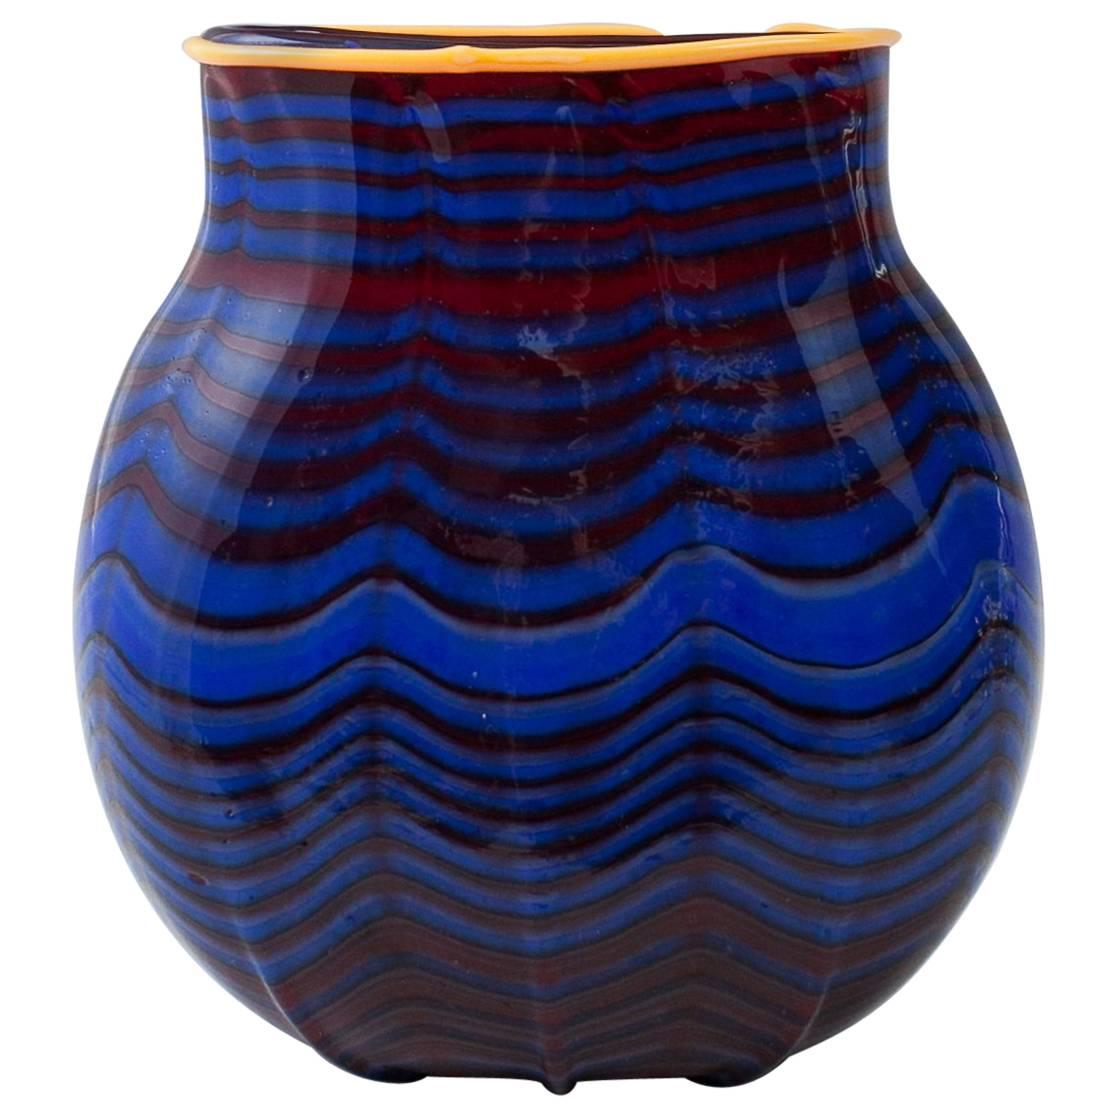 Vase Dale Chihuly, 1993 Toppiece, Unique, Signed